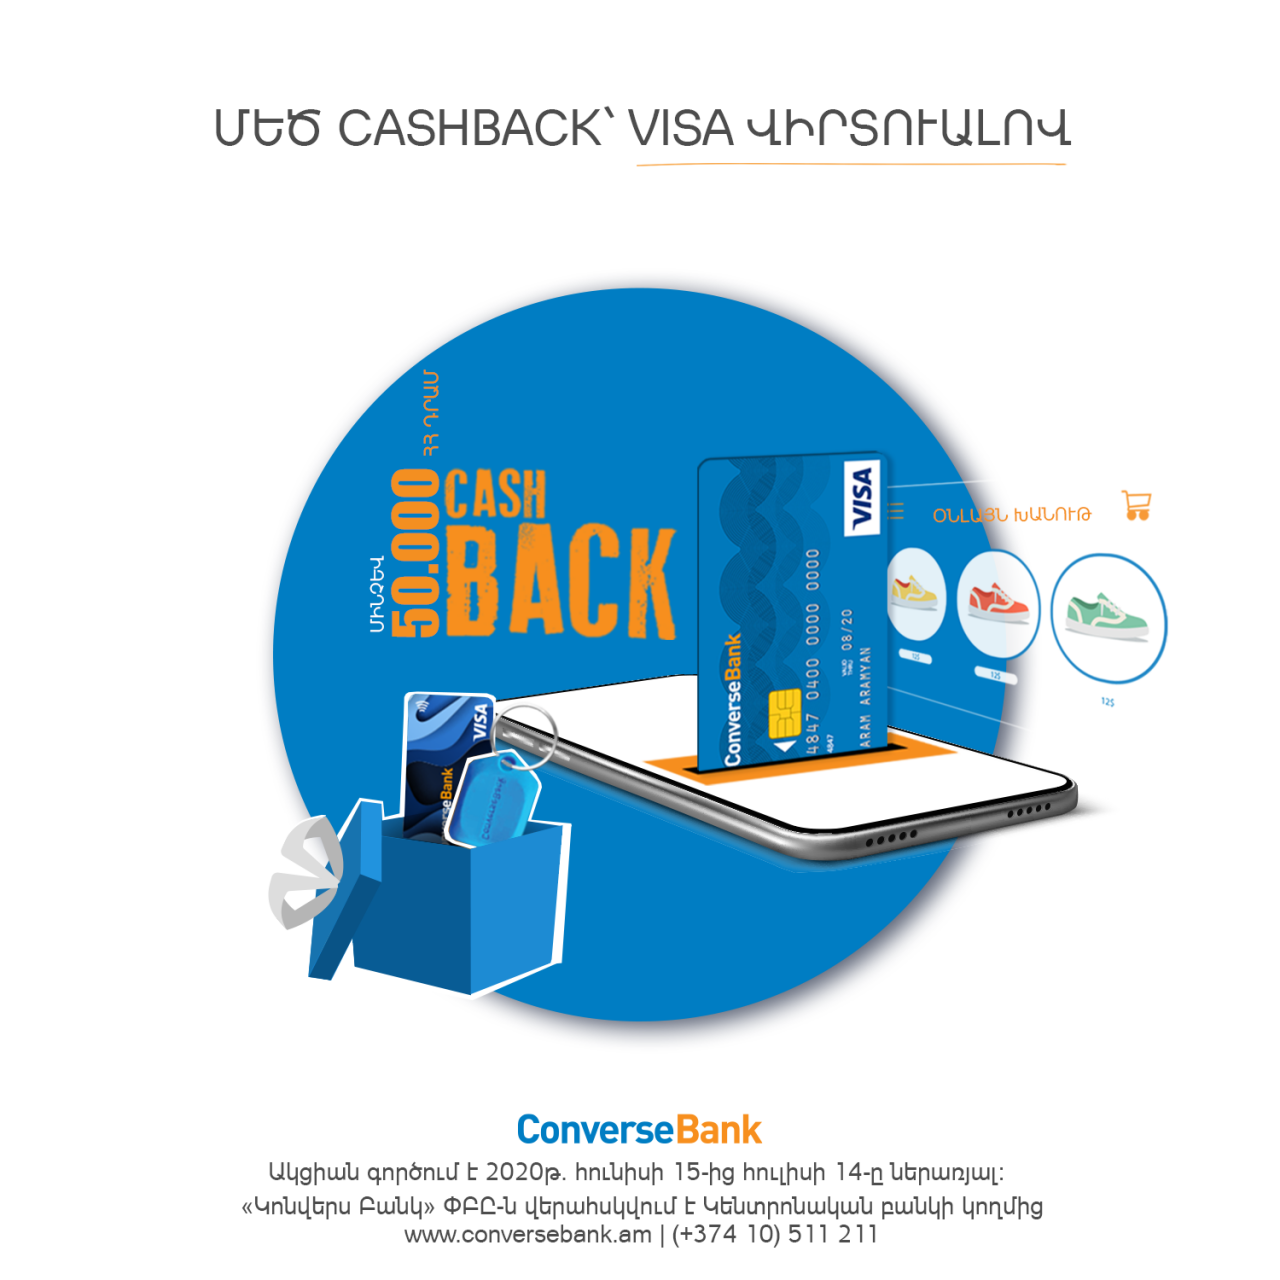 Converse Bank. Free VISA Virtual for Bank’s Mobile App Users and VISA Virtual campaign for all cardholders